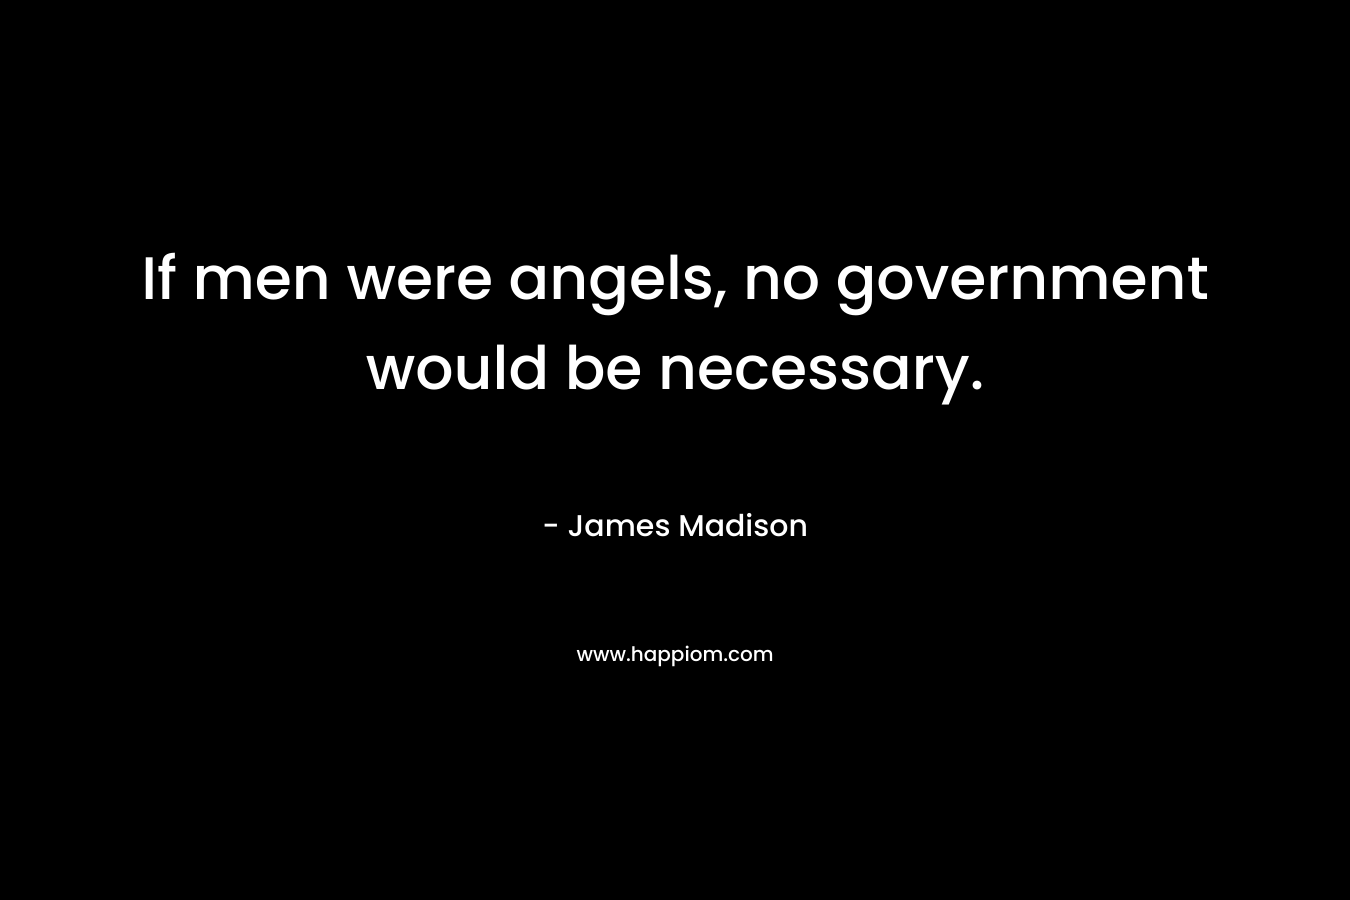 If men were angels, no government would be necessary. – James Madison